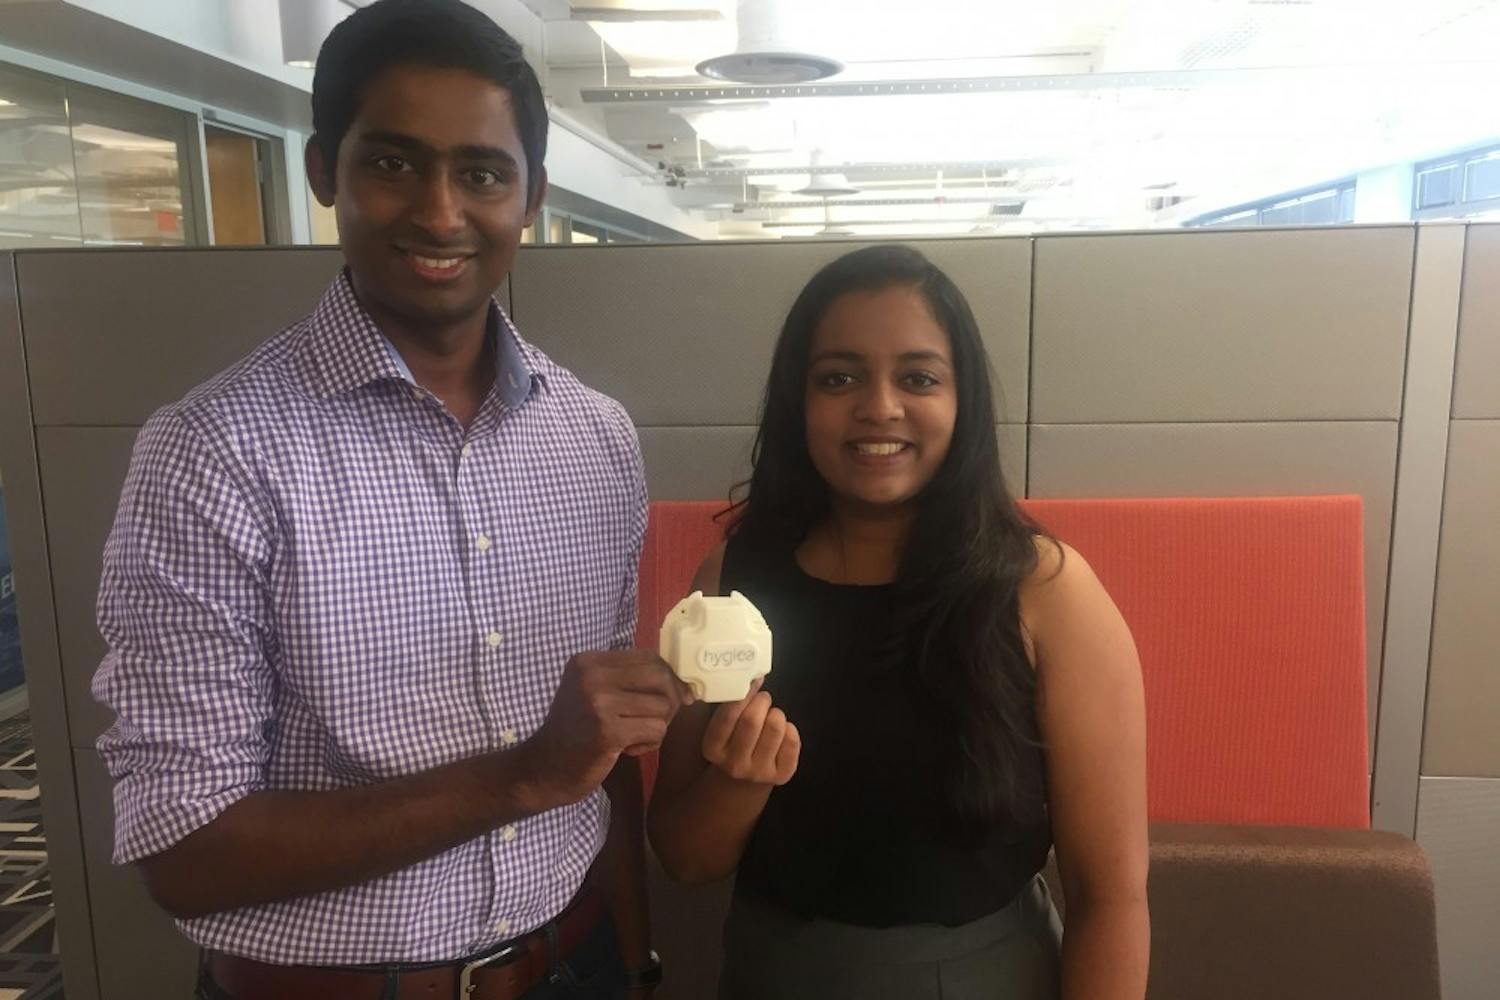 Saiman Shetty (Left) and Pooja Addla Hari (Right) hold a model of one of Hygiea's sensors in Skysong1 on April 21, 2017.&nbsp;